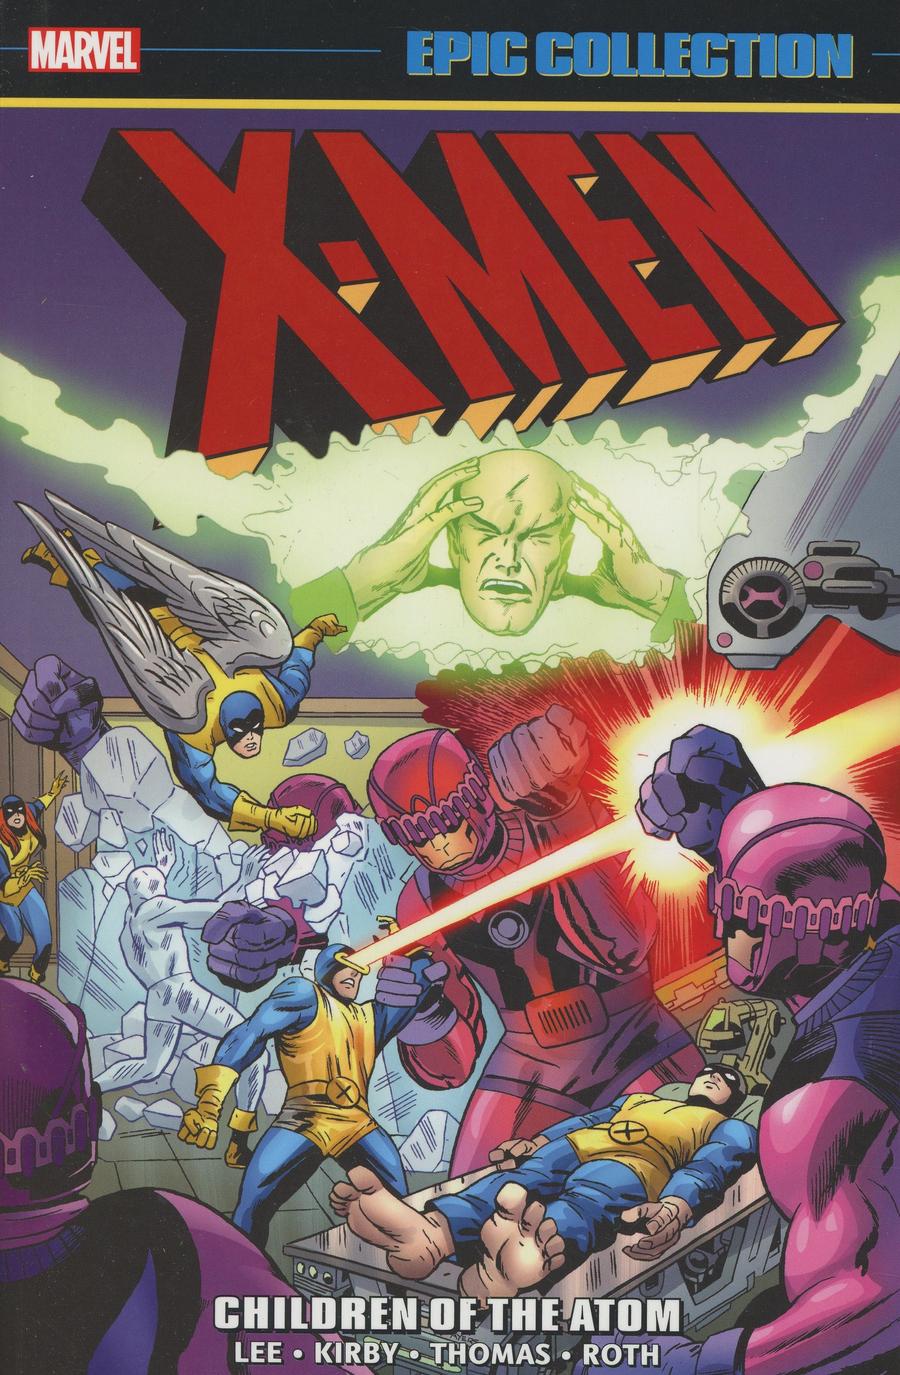 X-Men Epic Collection Vol 1 Children Of The Atom TP New Printing